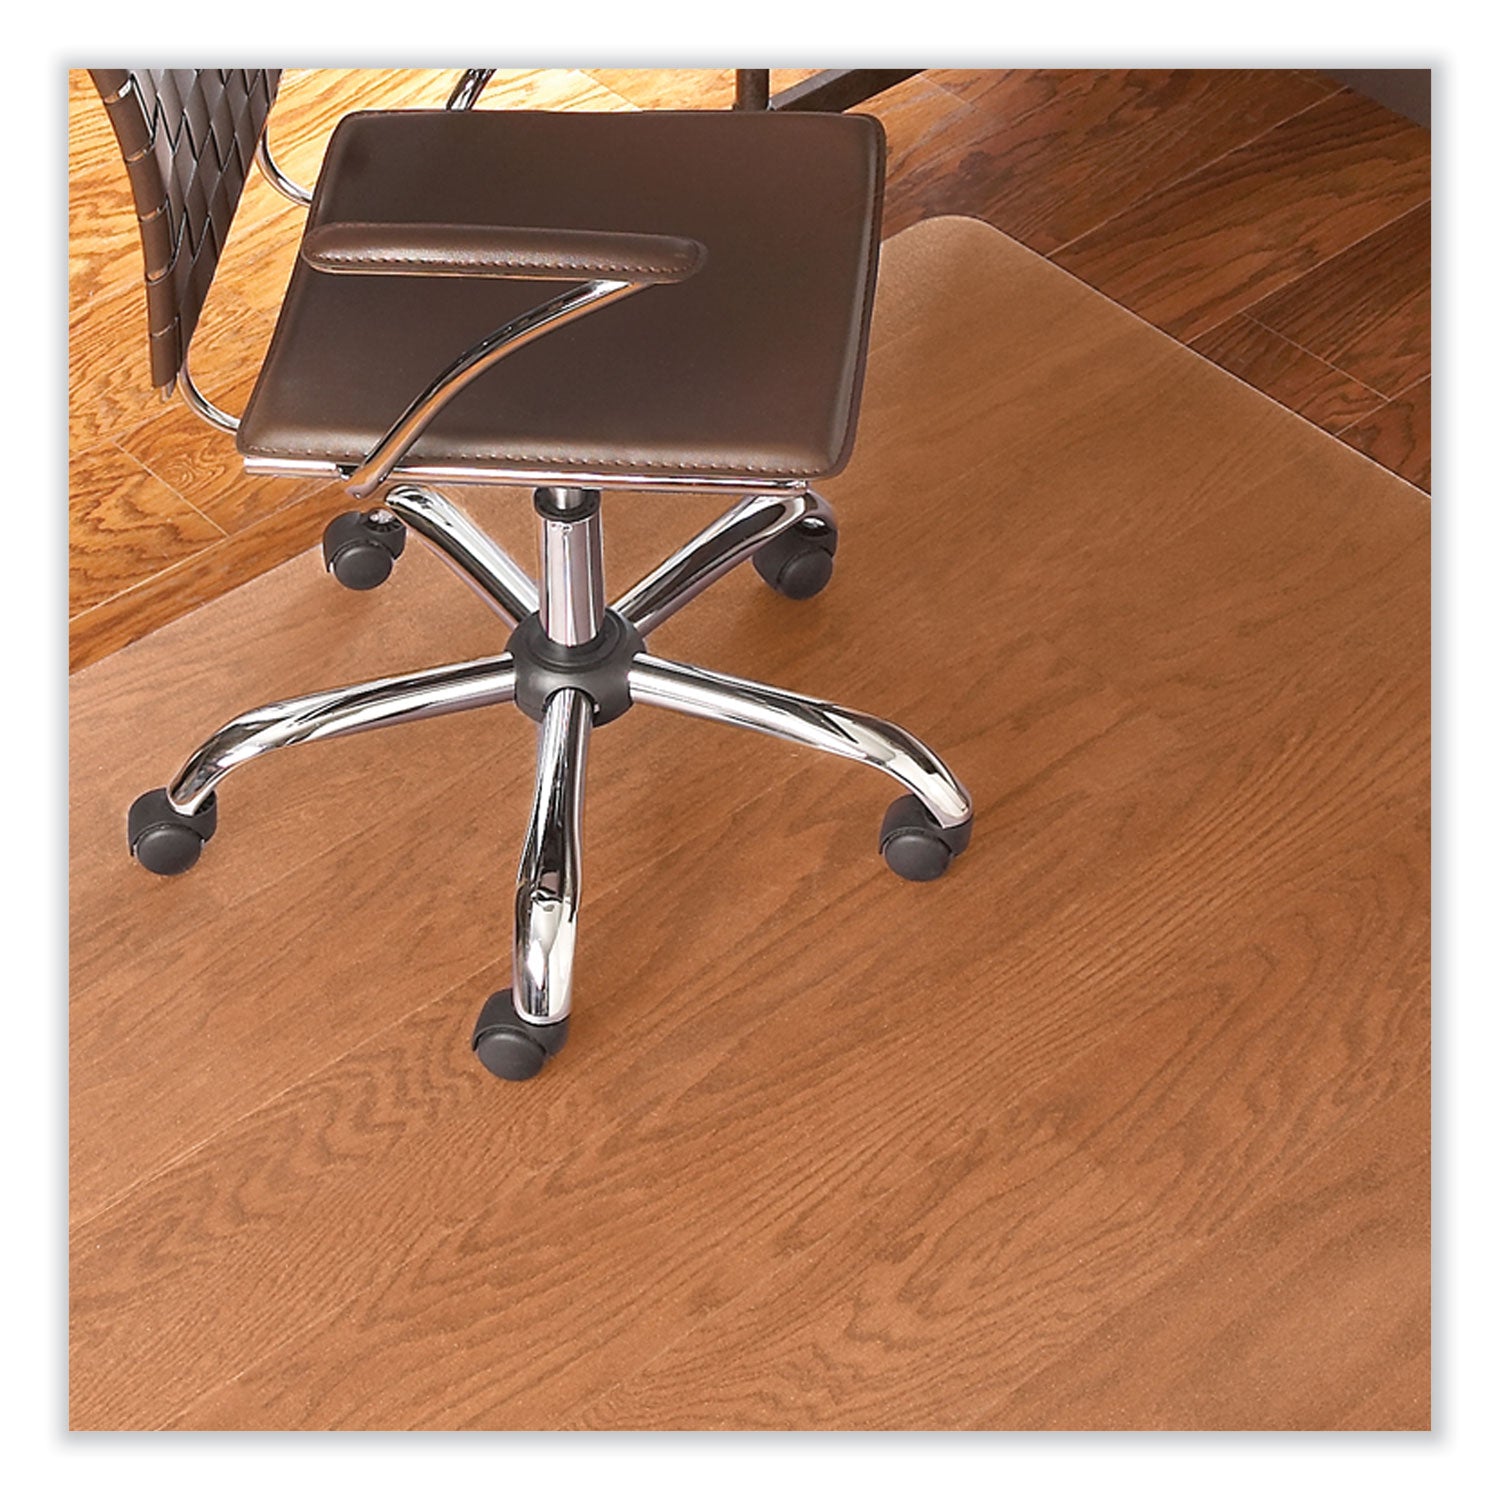 everlife-chair-mat-for-hard-floors-heavy-use-rectangular-48-x-72-clear-ships-in-4-6-business-days_esr132431 - 2